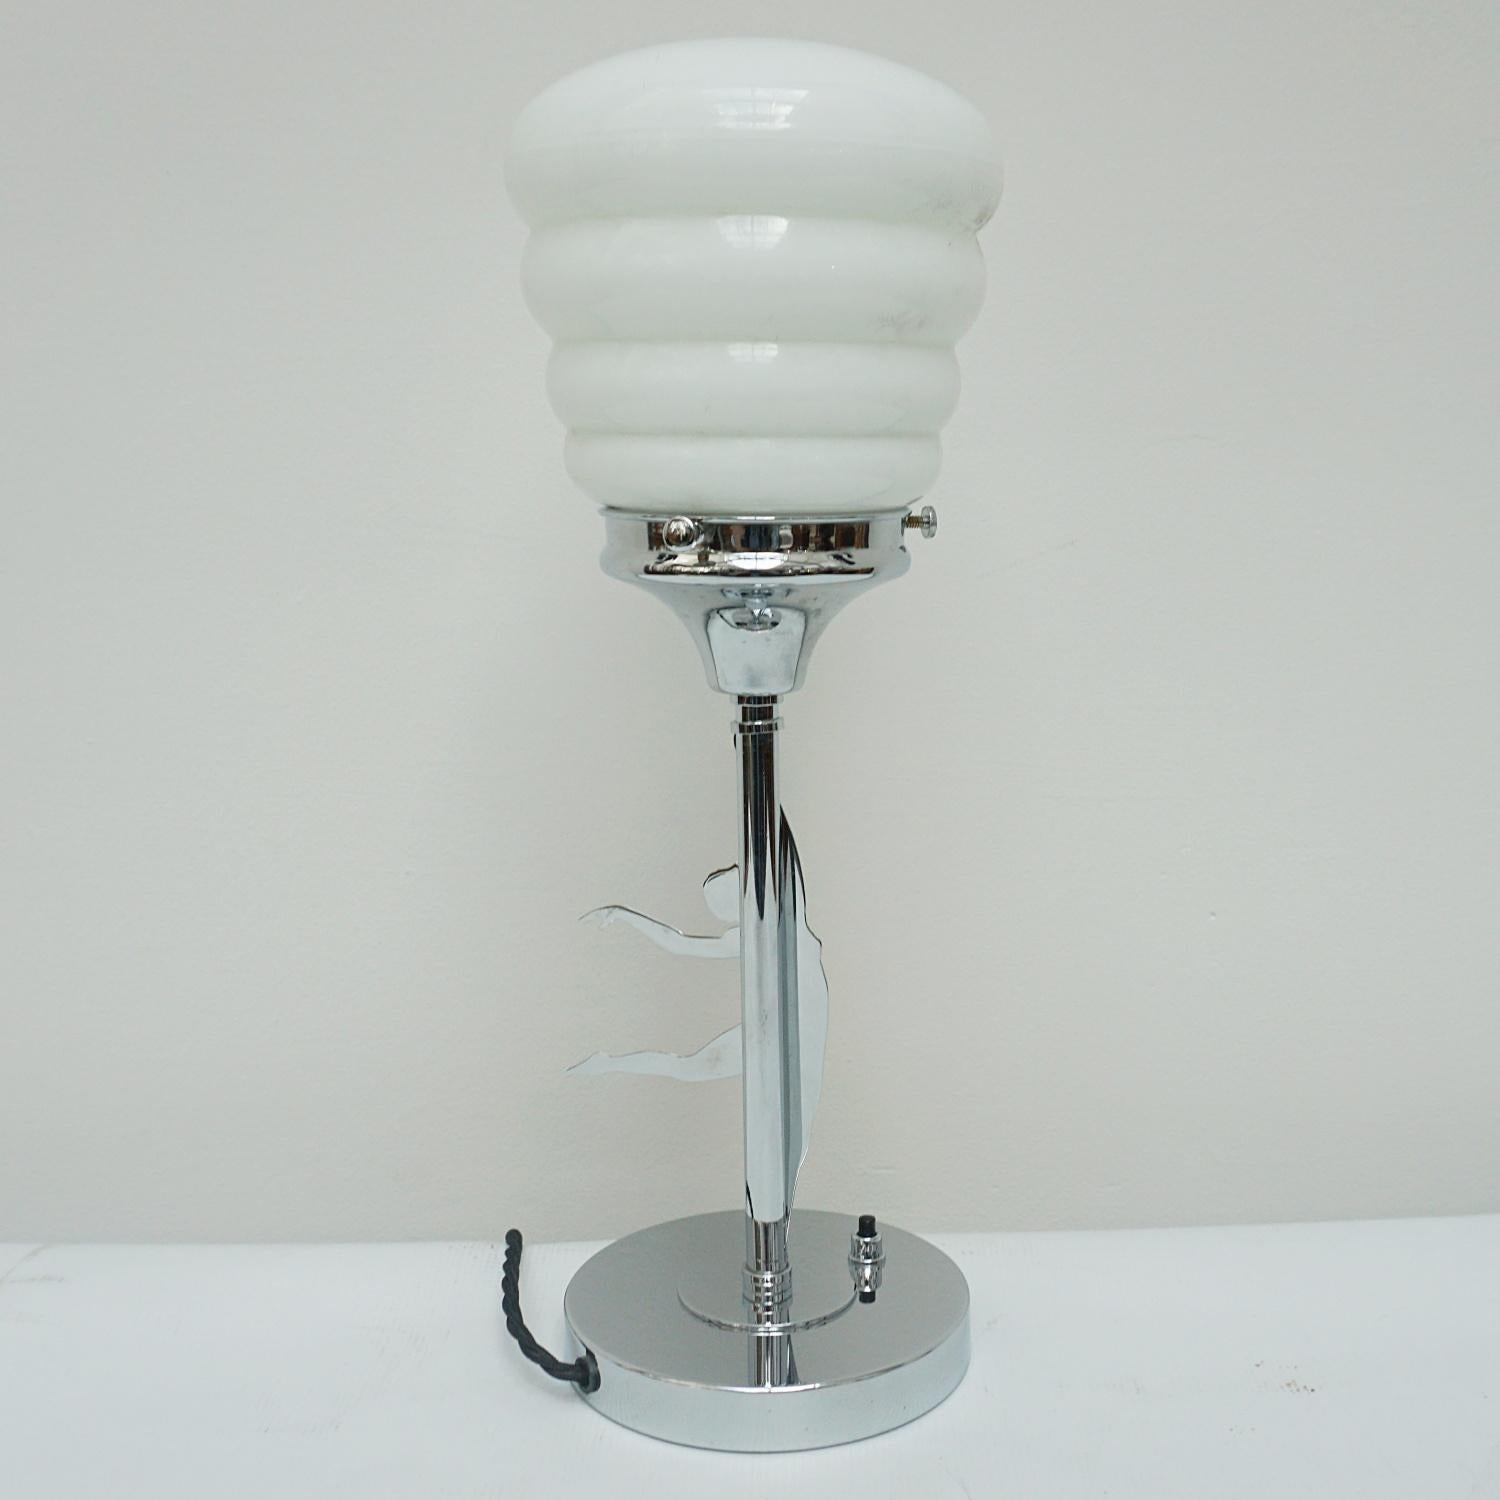 A 20th century chromed metal table lamp with a chromed metal mounted female dancer. Bevelled glass shade. 

Dimensions: H 40cm D 13cm.

Origin: English

Item Number: J244

All of our lighting is fully refurbished, re-wired, and re-chromed